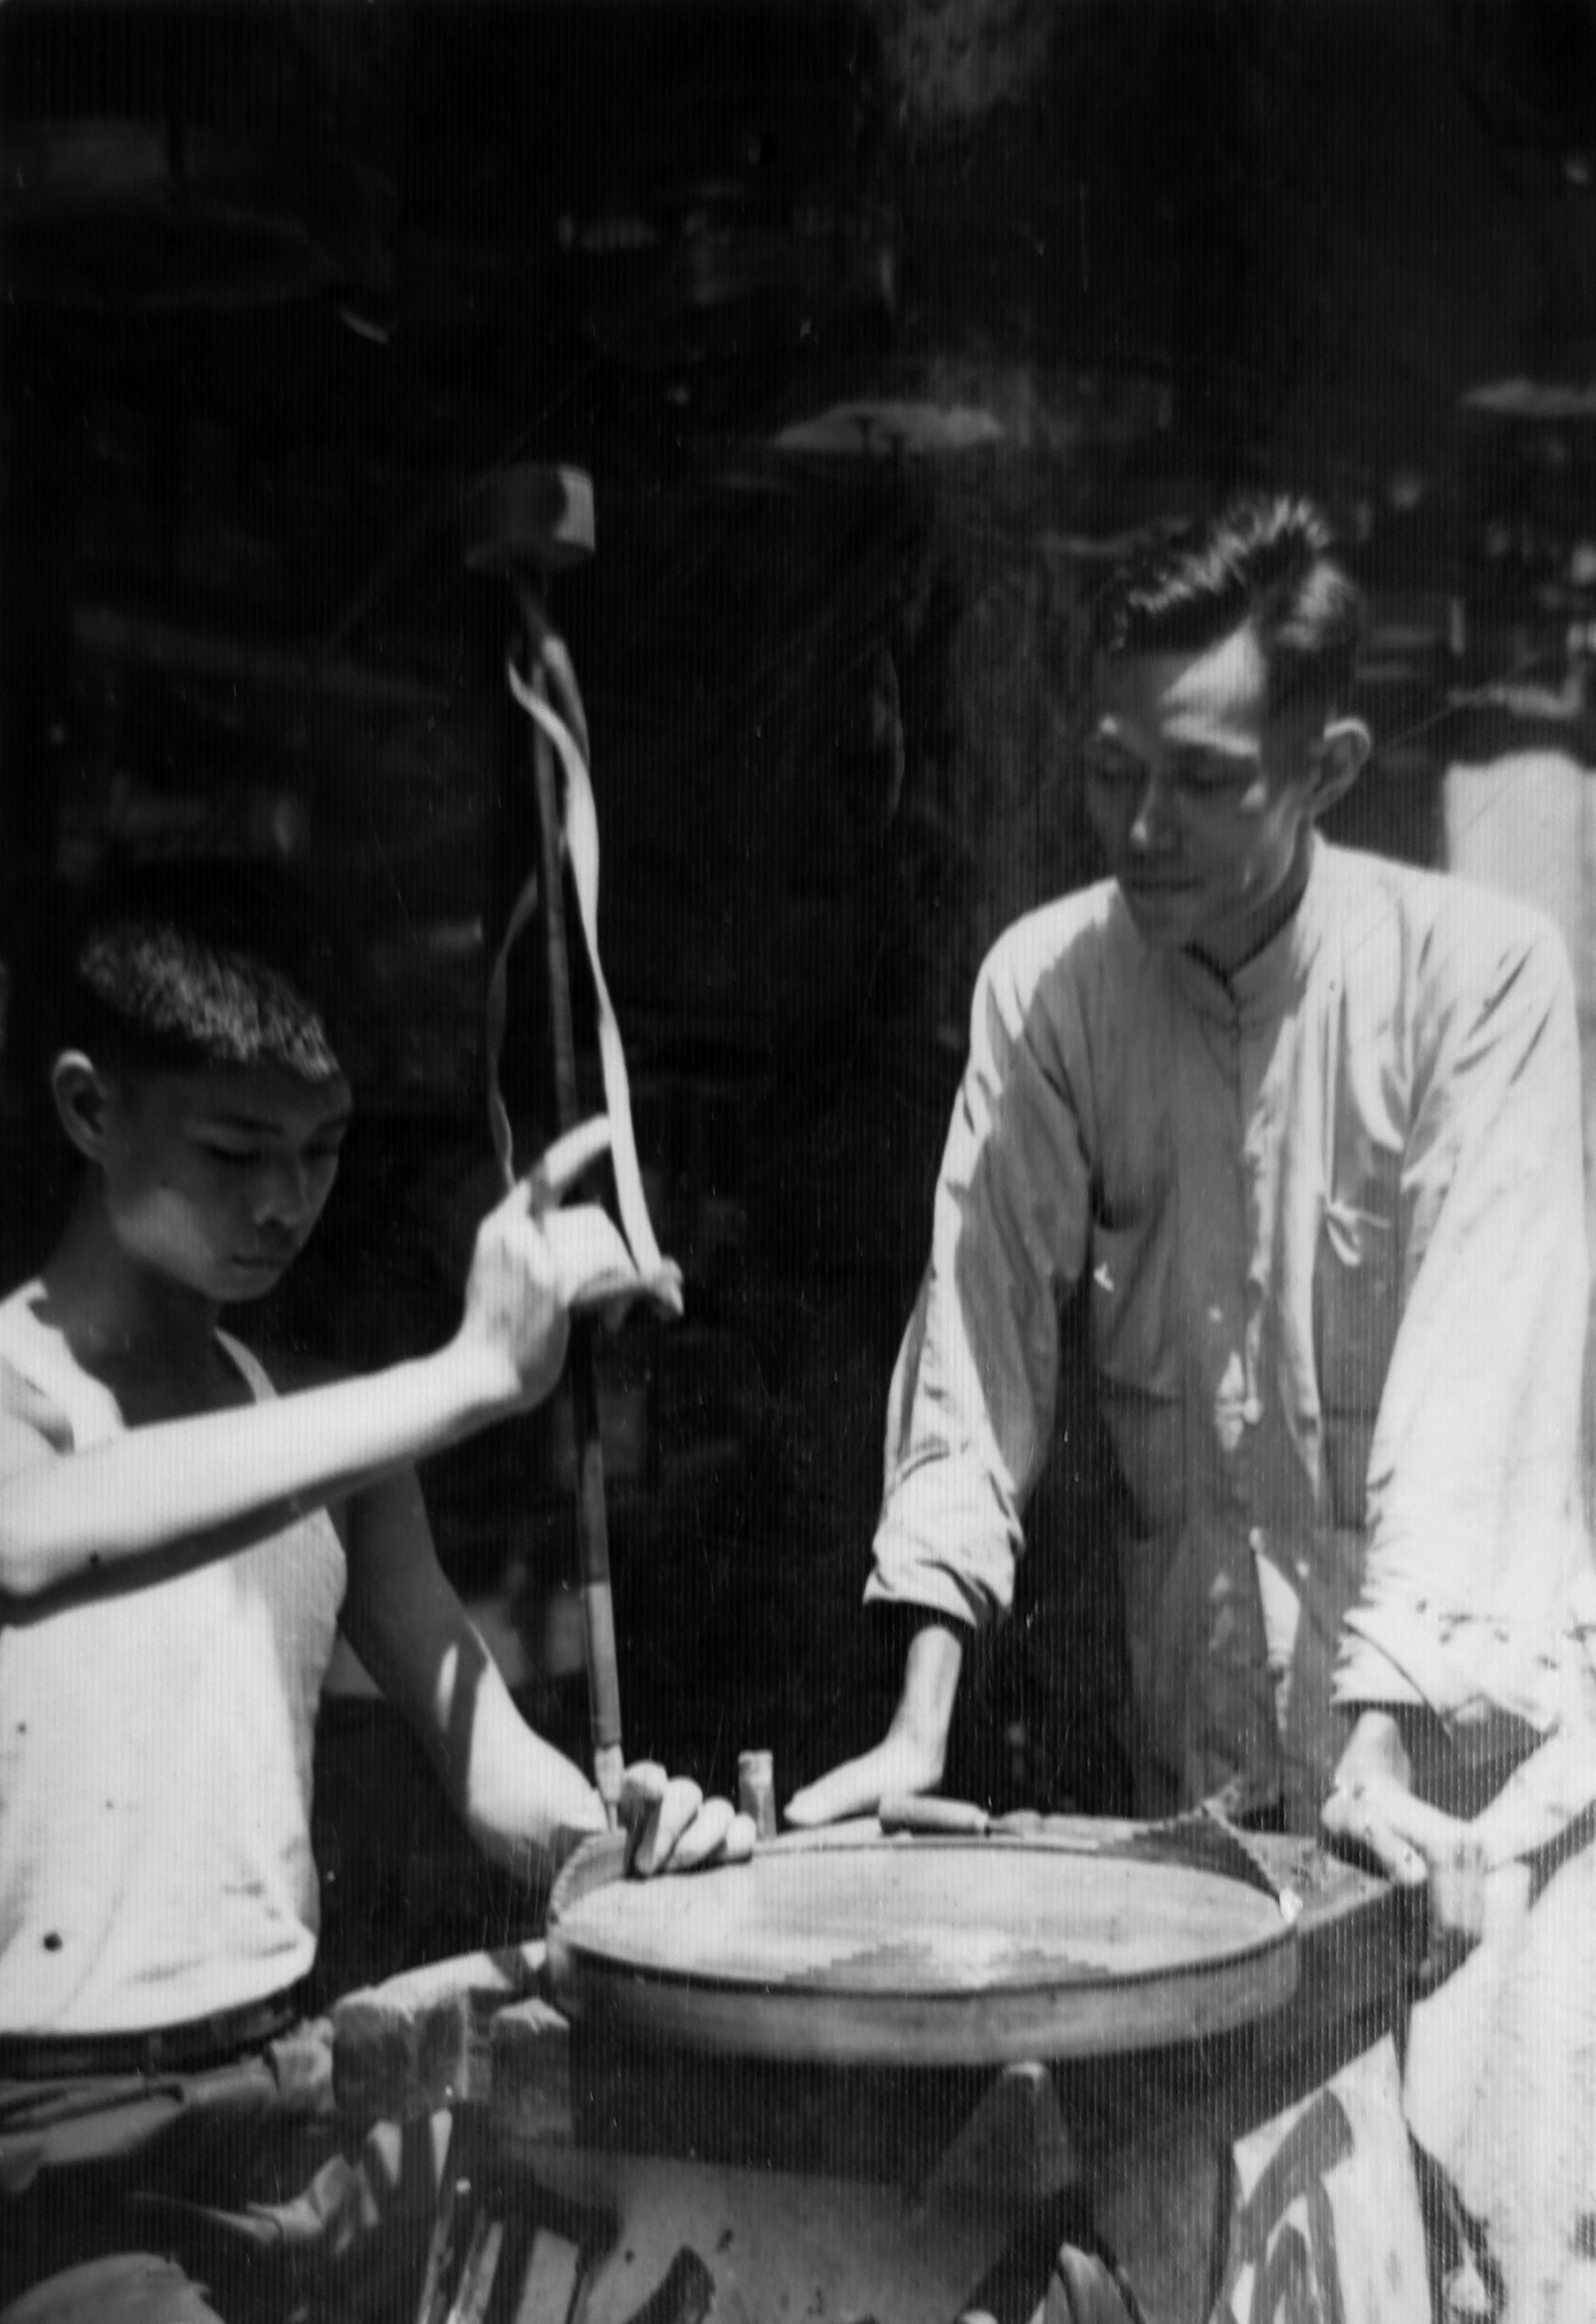 Birdcage Master Cheuk Hong (right) teaches
          his apprentice Chan Lok Choi (left)